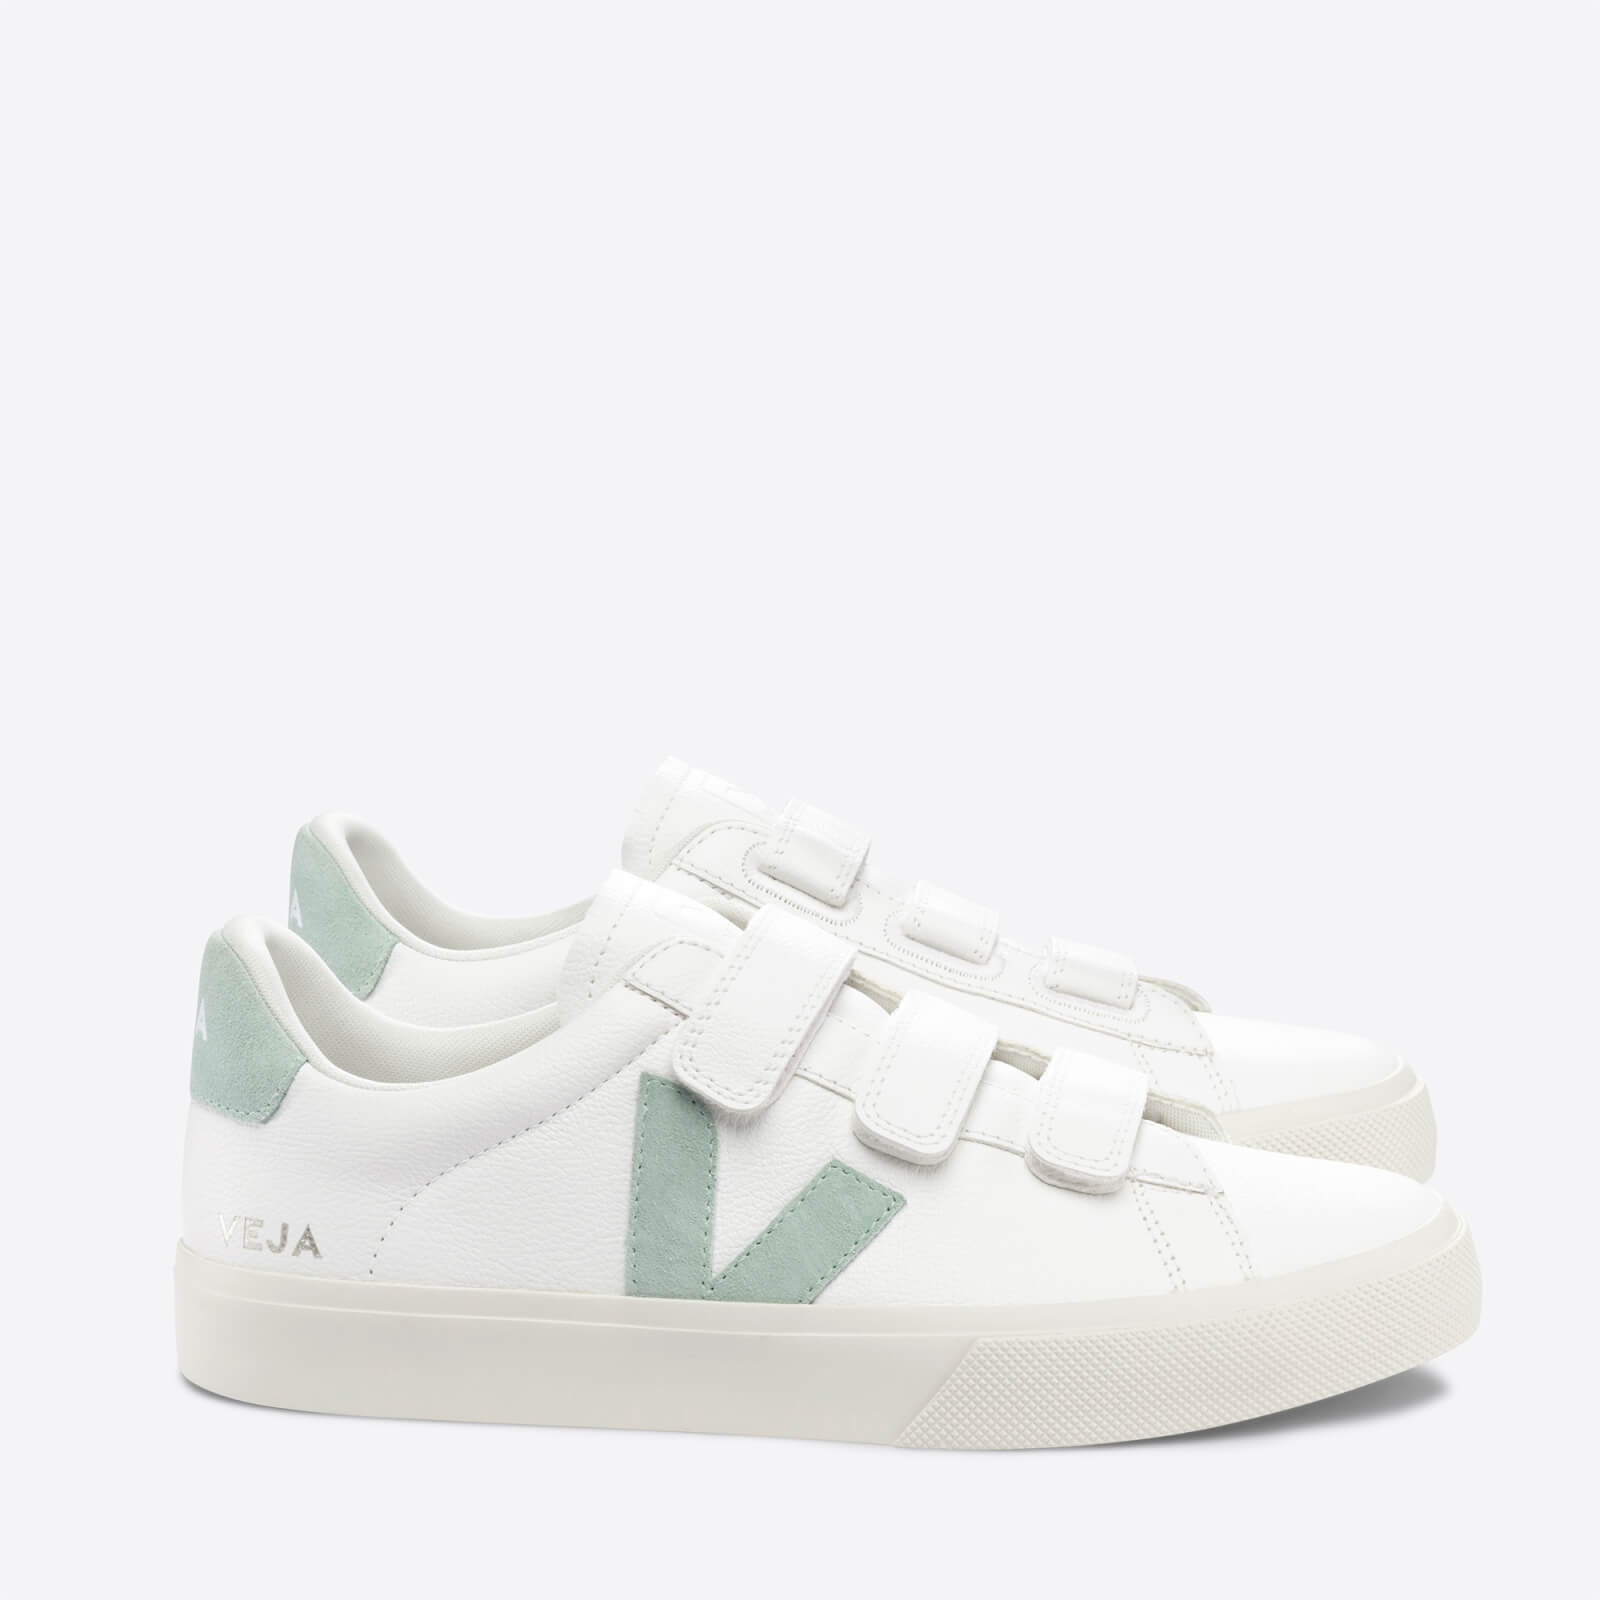 Veja Women's Chrome Free Leather and Suede Trainers